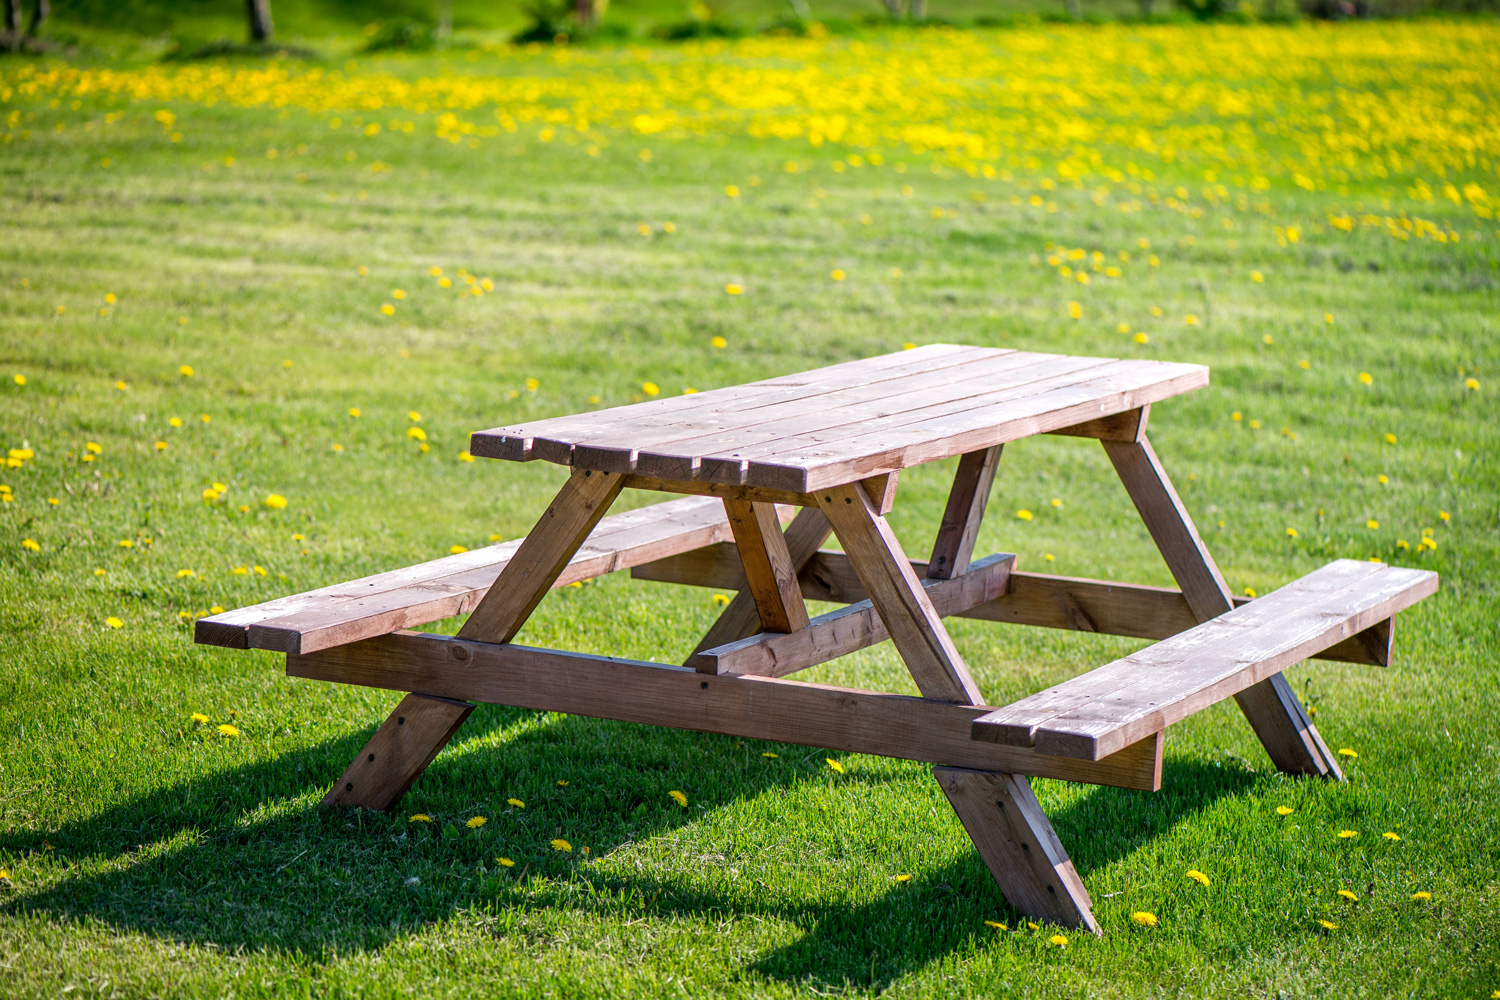 Wooden Picnic Bench and Table Set Installed Free Standing On To Grass